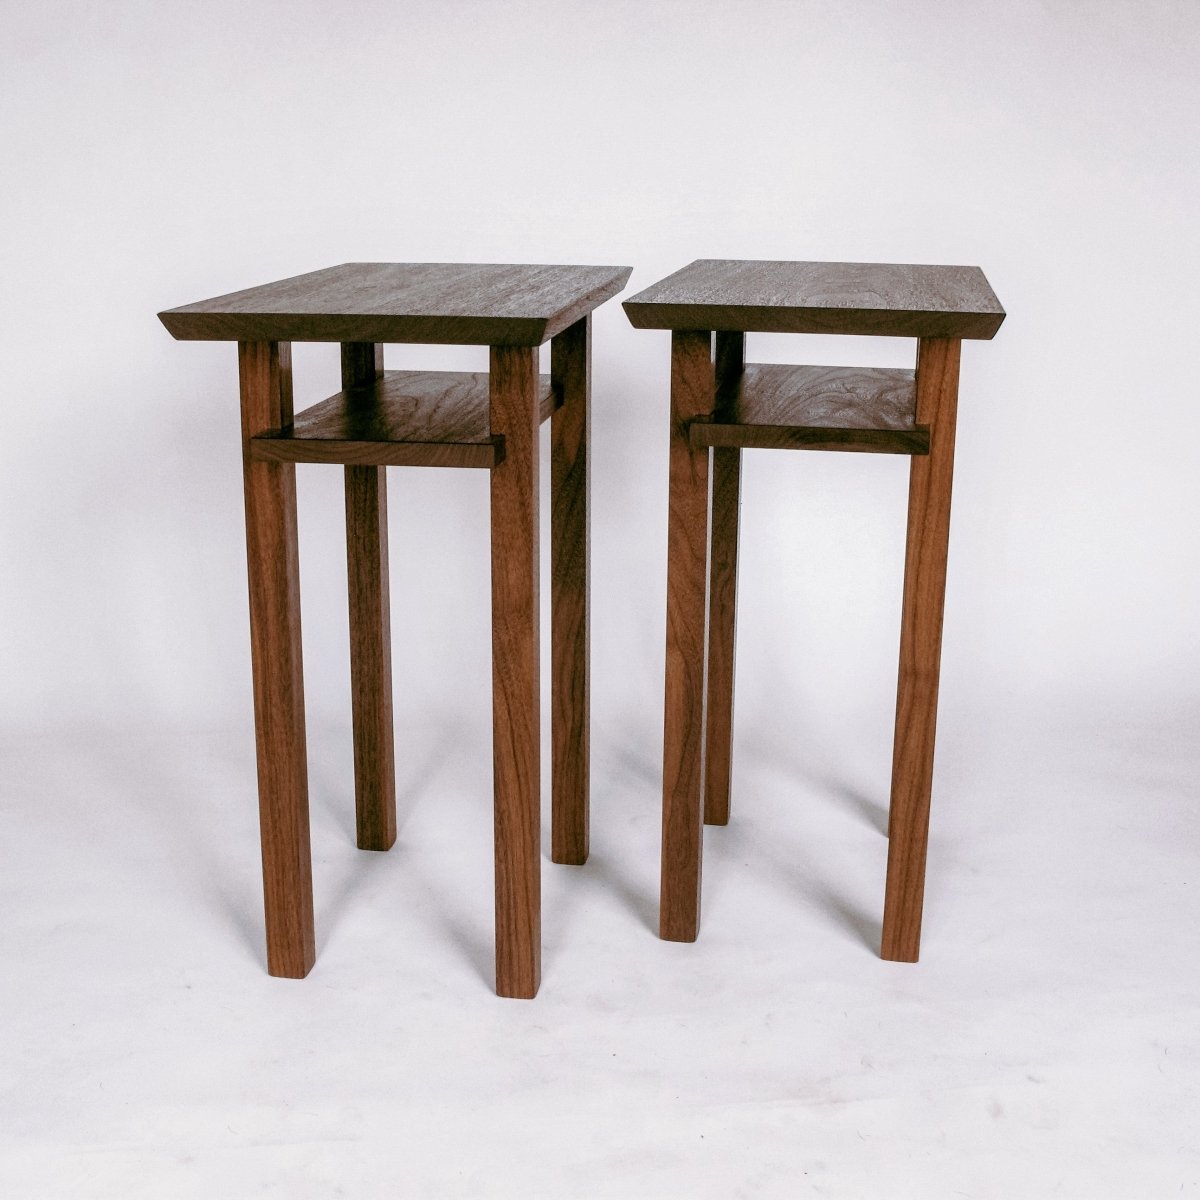 small narrow tables - narrow nightstands or end tables